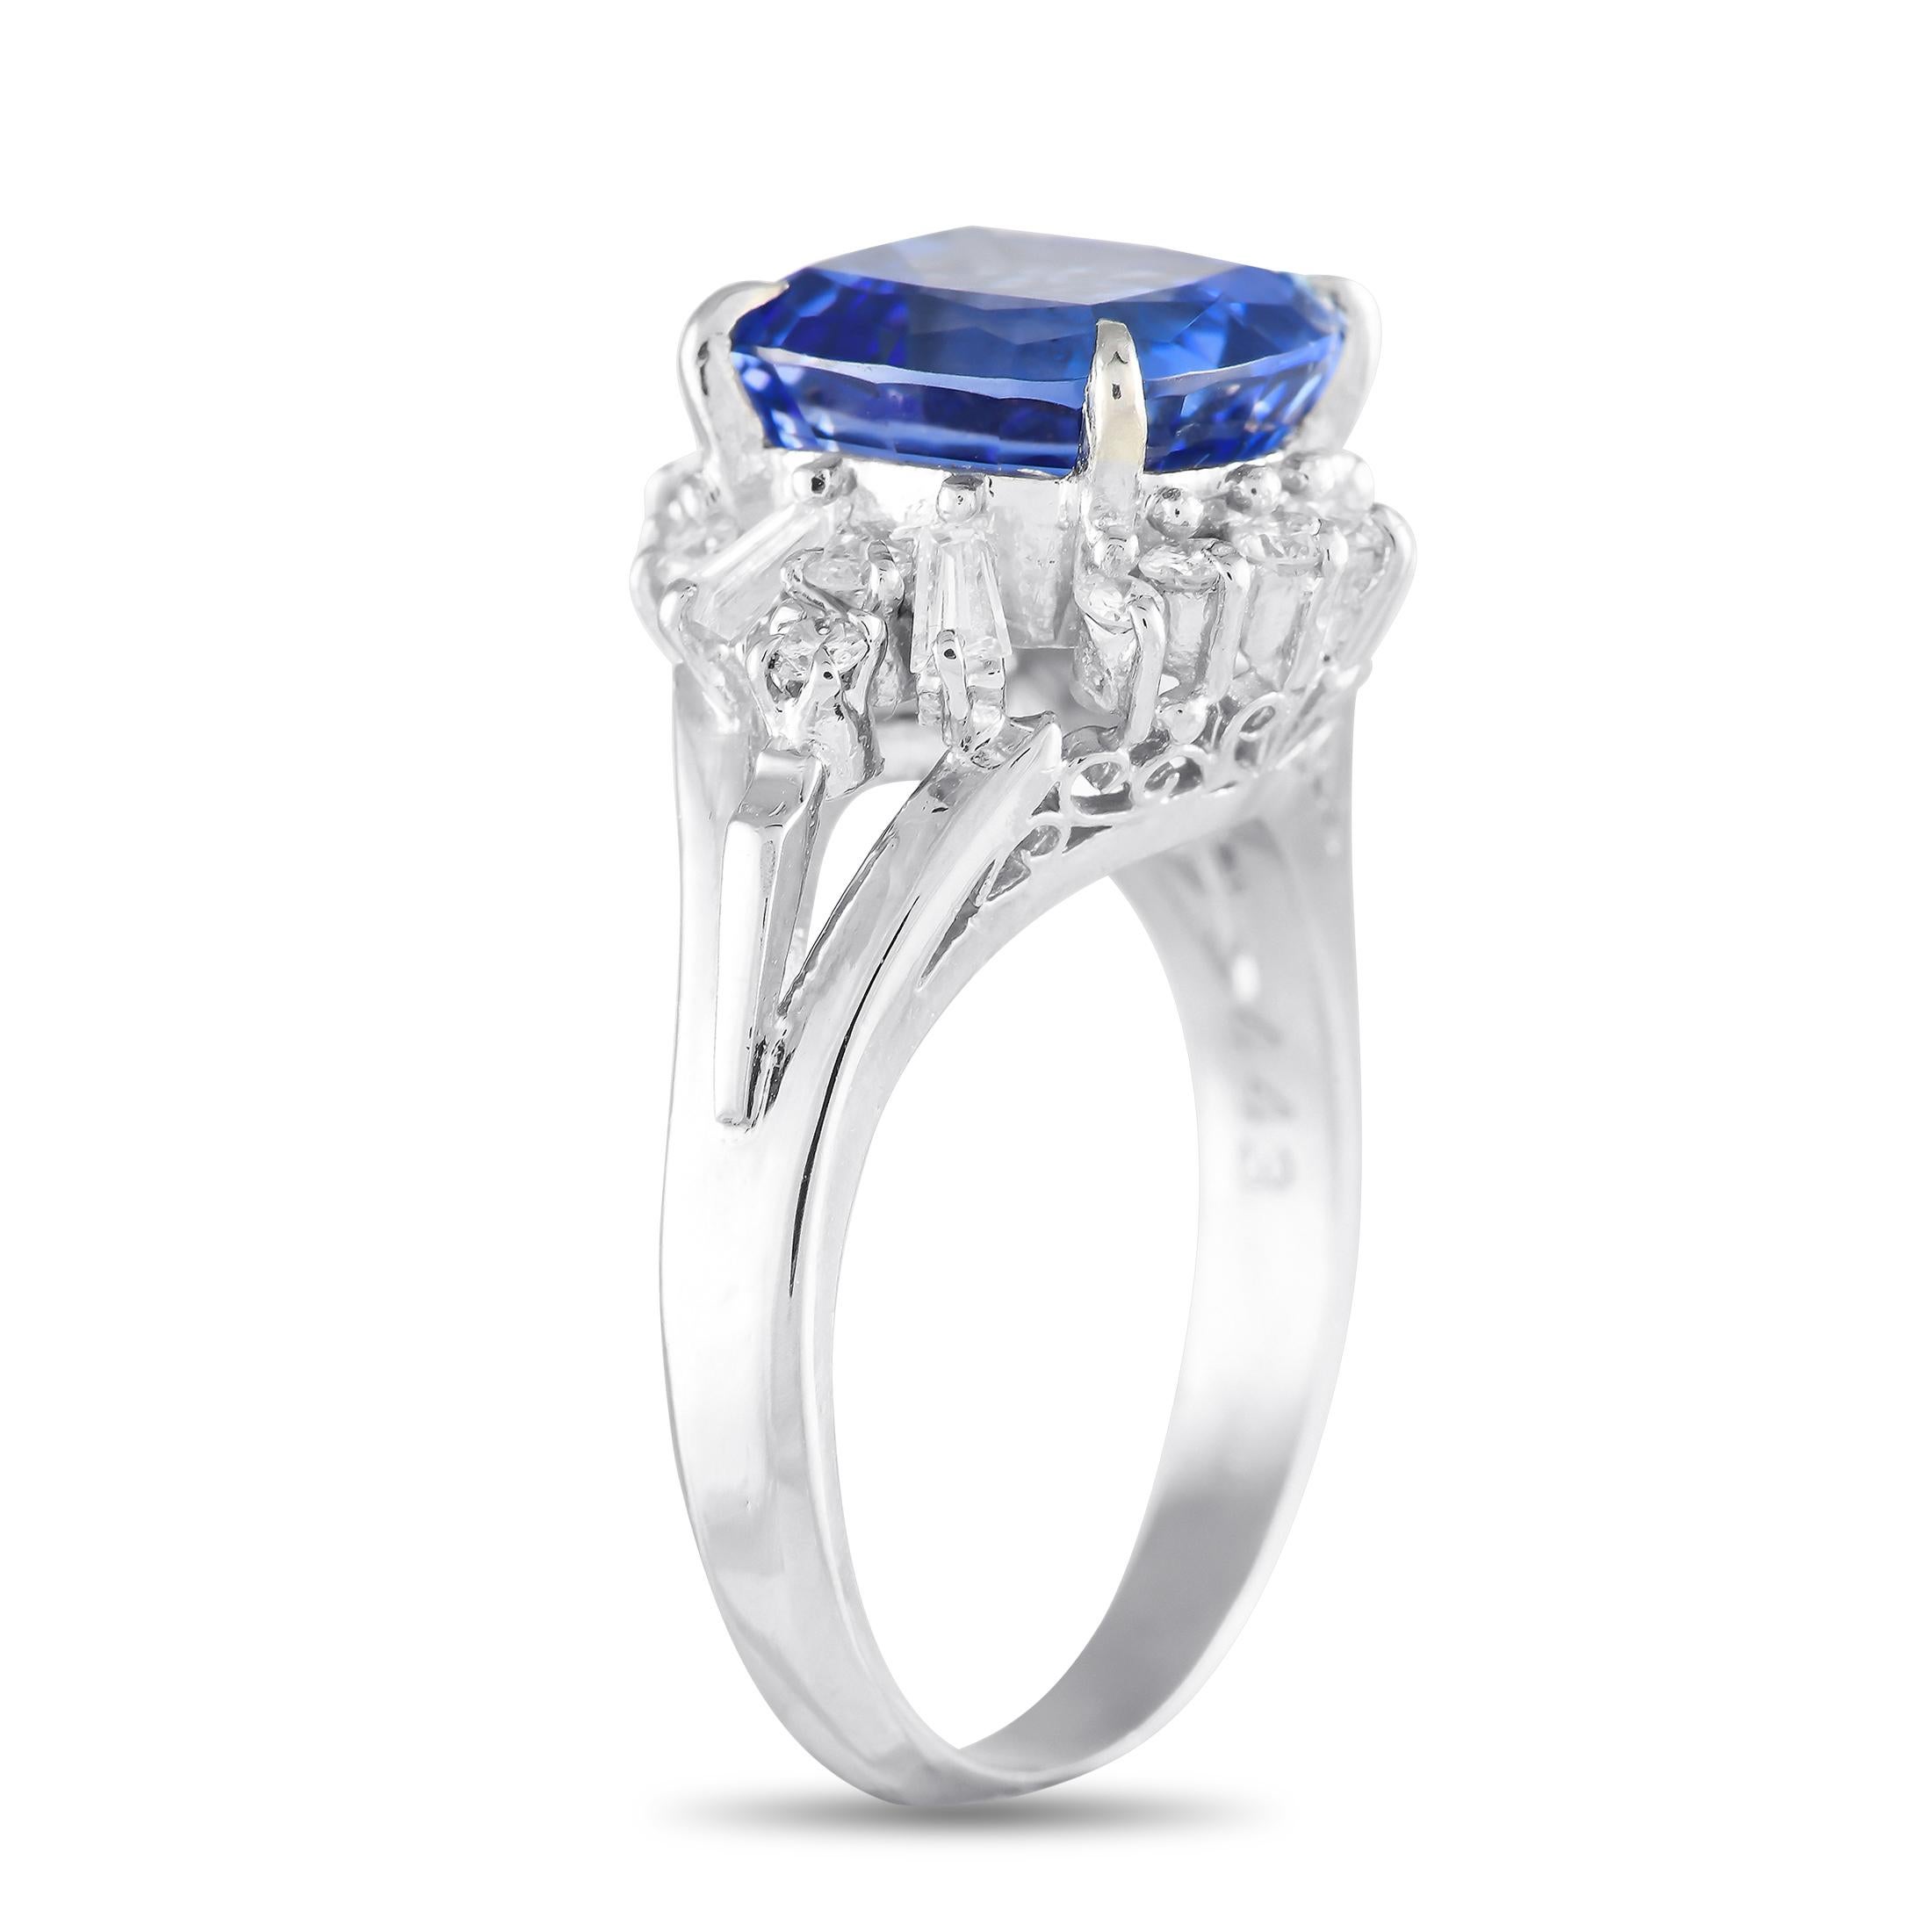 This radiant ring is poised to continually take your breath away. Bold and incredibly elegant, the stunning 4.43 carat Tanzanite center stone is surrounded by Diamonds with a total weight of 0.56 carats. Crafted from shimmering Platinum, this piece